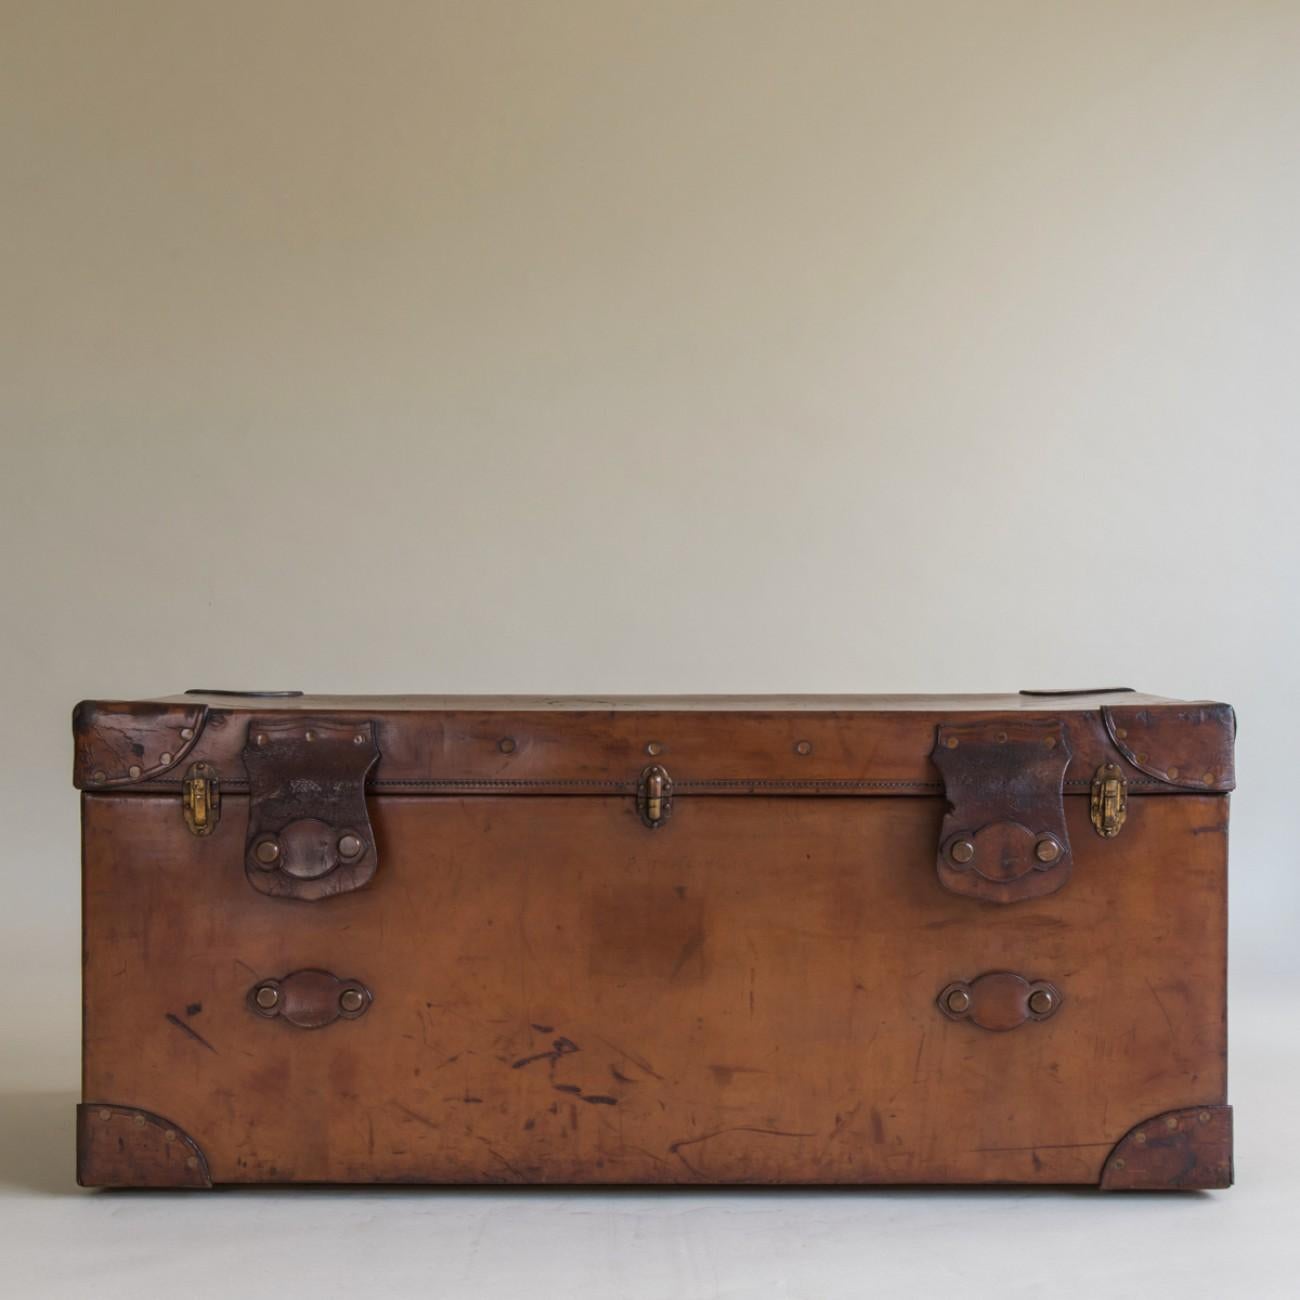 An exceptional leather trunk with original interior made by Finnigans, one of England's finest luggage making companies, circa 1920.

Dimensions: 48cm/19 inches (height) x 115cm/45 inches (width) x 56cm/22 inches (depth).

Bentleys are Members of